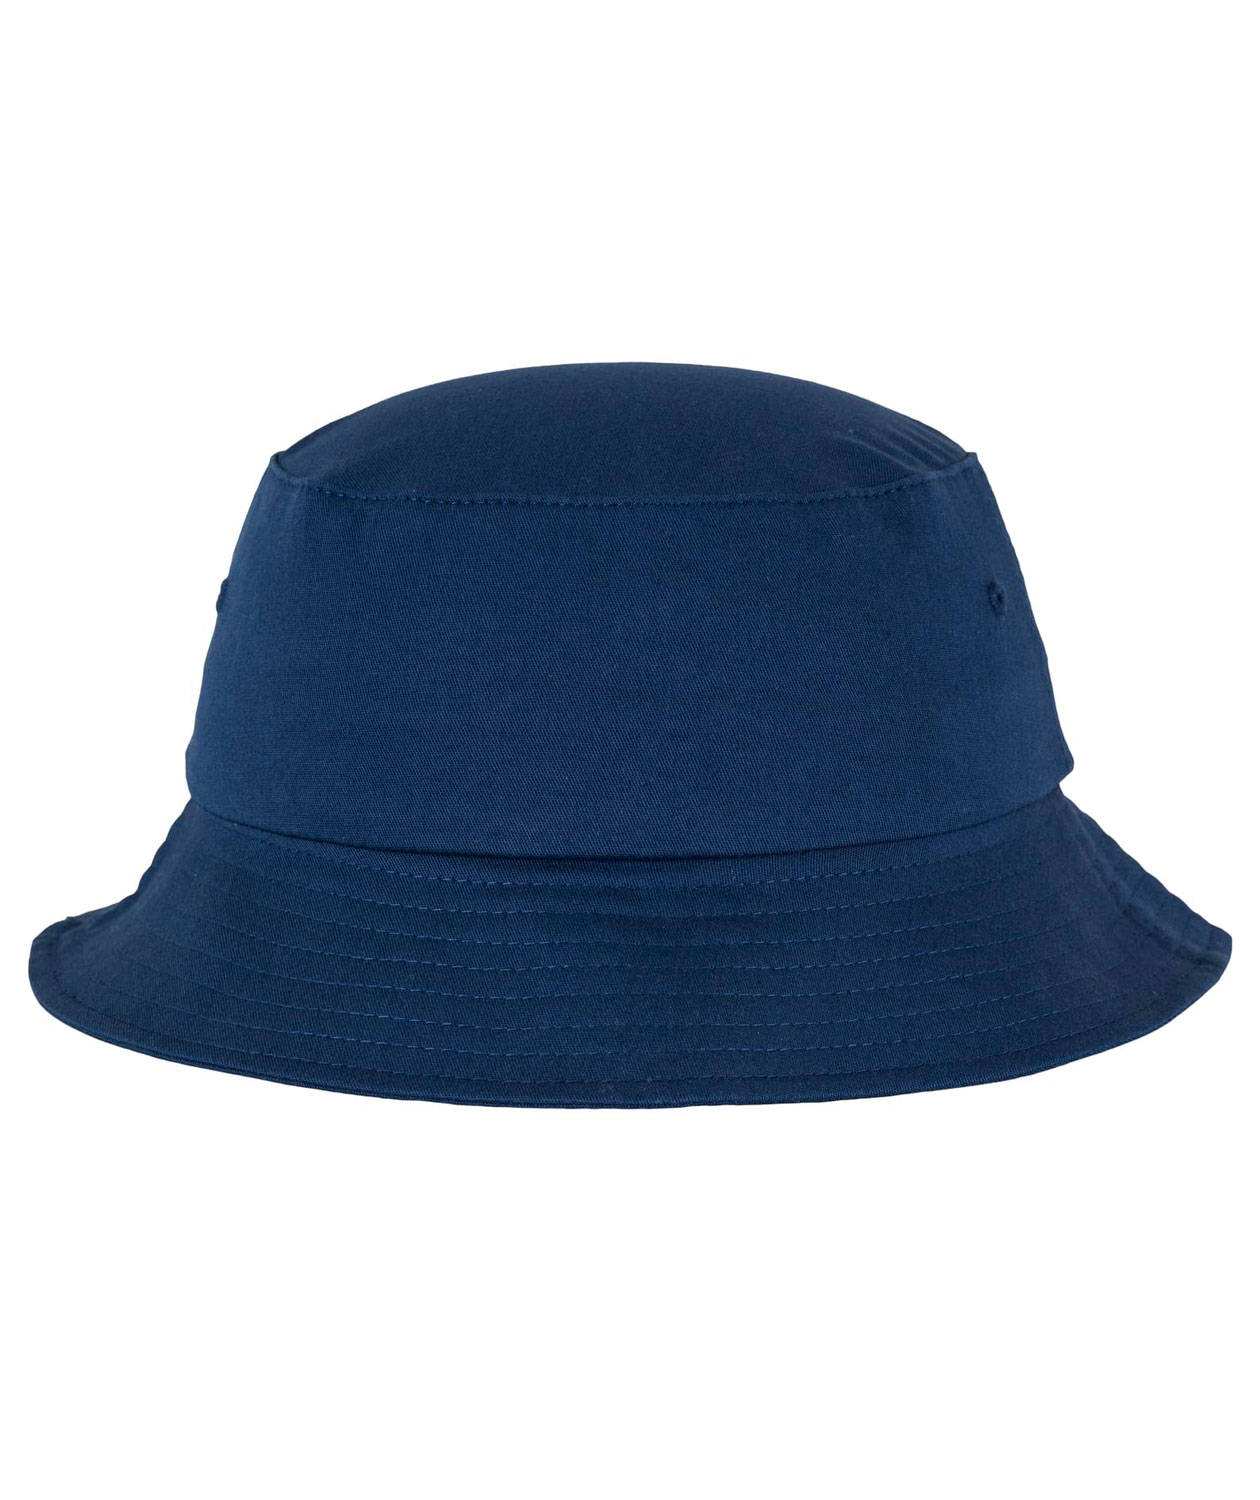 Bucket Hat | Buy your bucket hat at Cheap-workwear.com